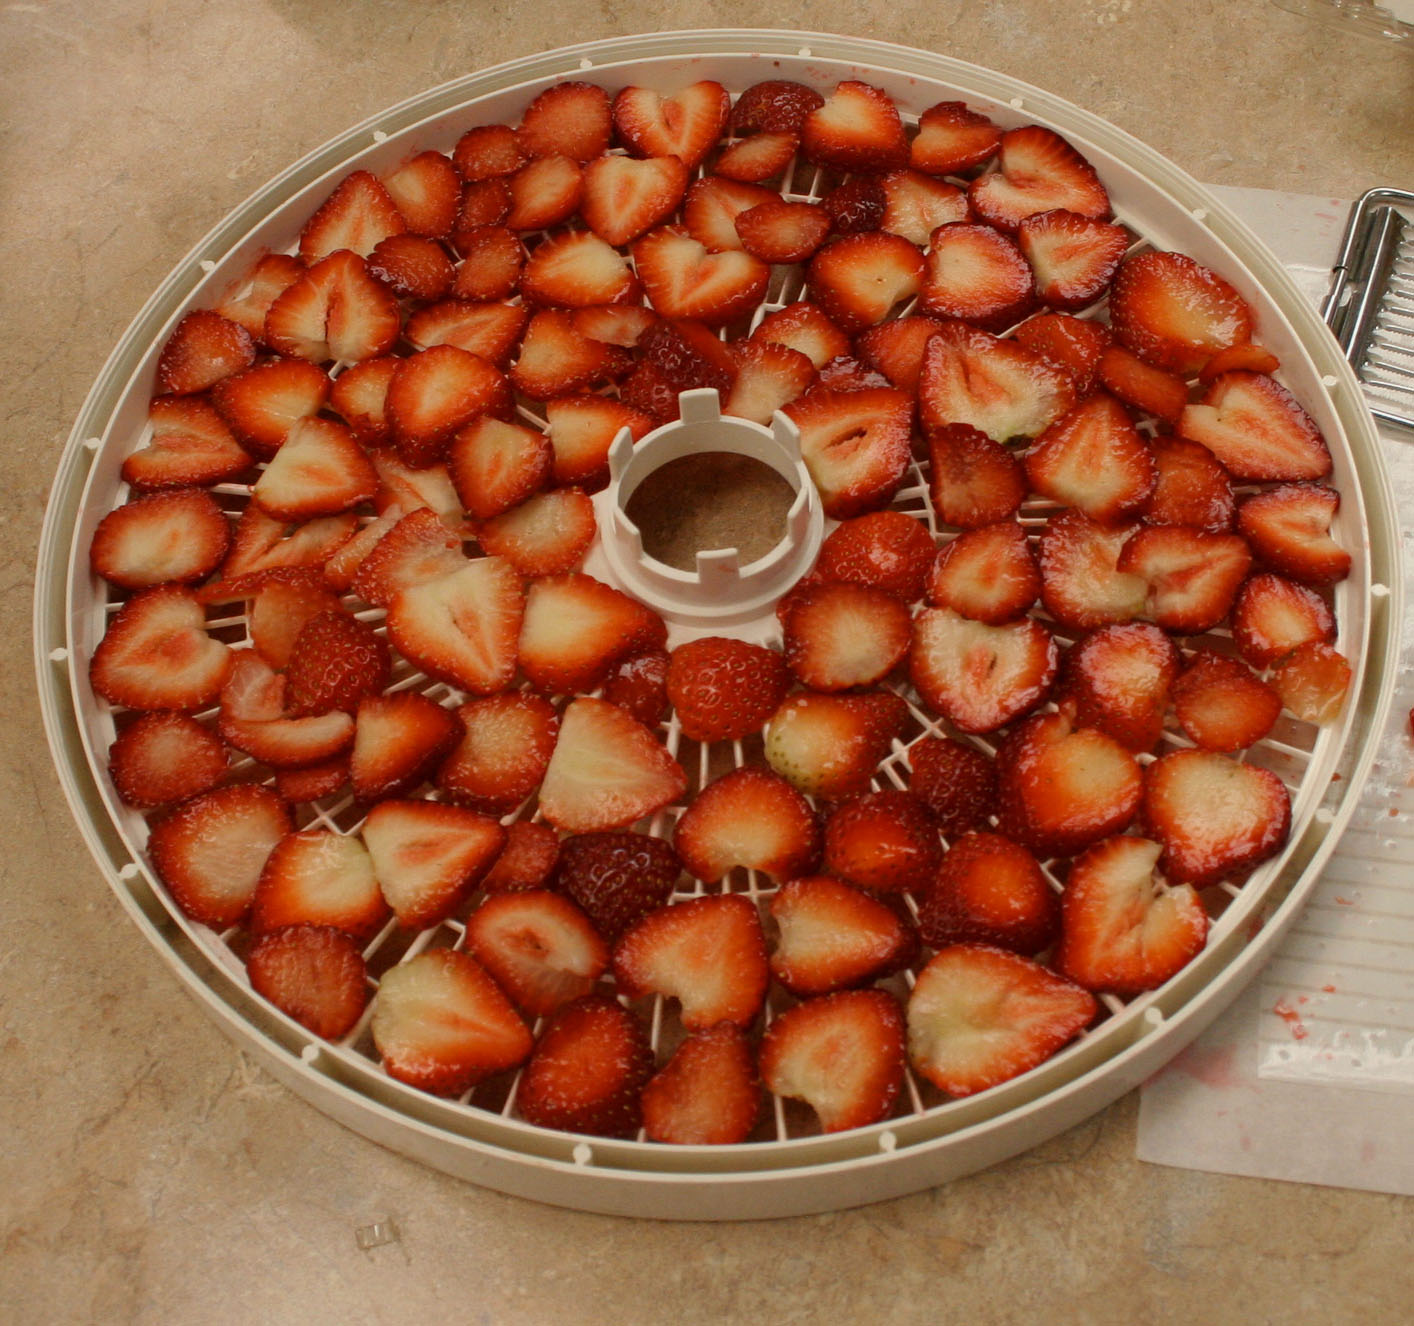 Sliced ripe strawberries are arranged on a round drying rack.